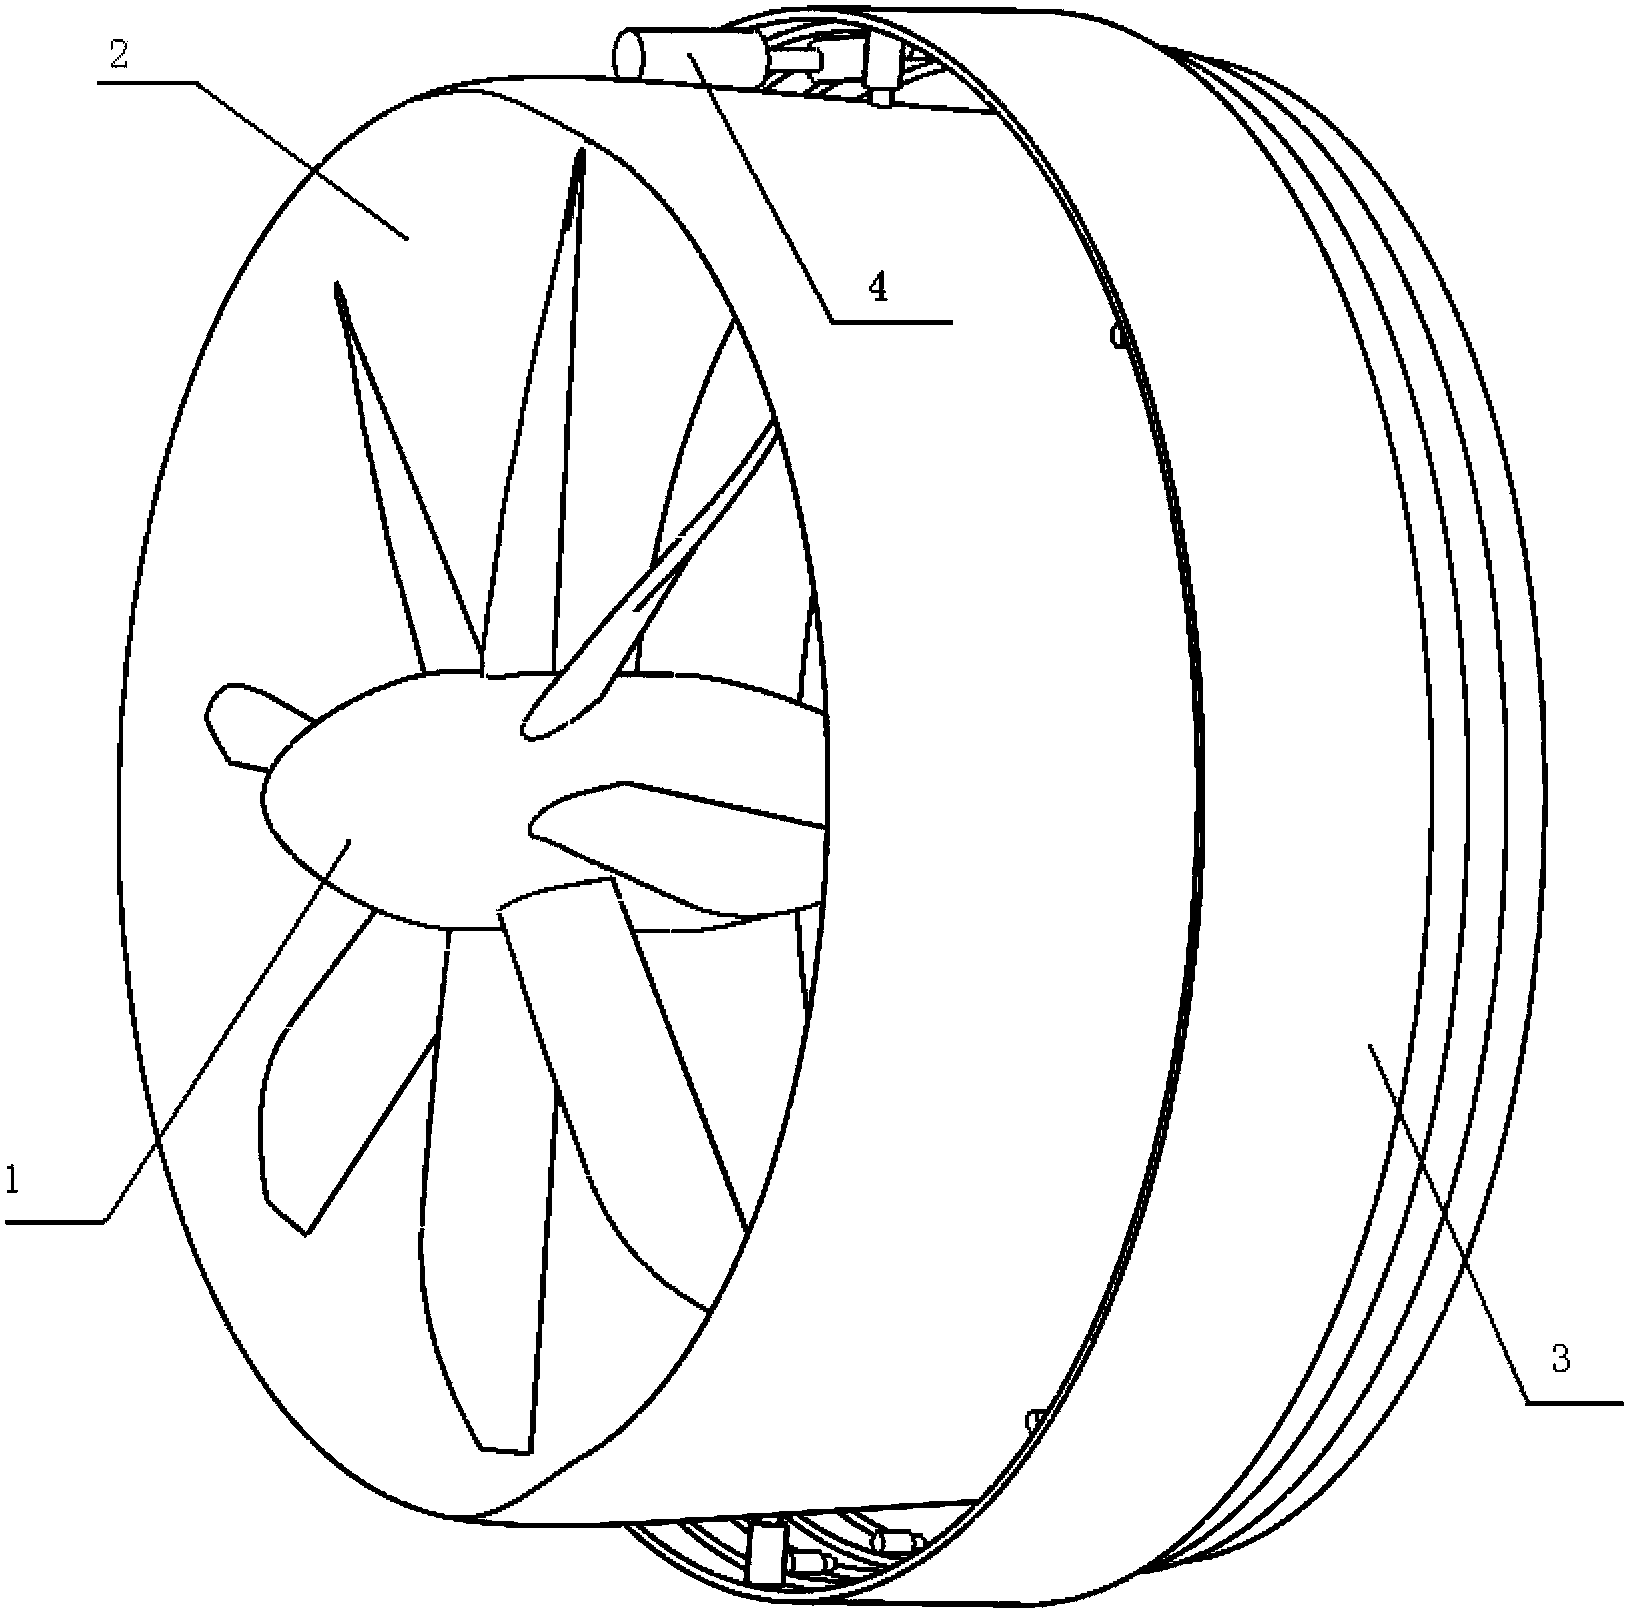 Thrust device capable of balancing reactive torque